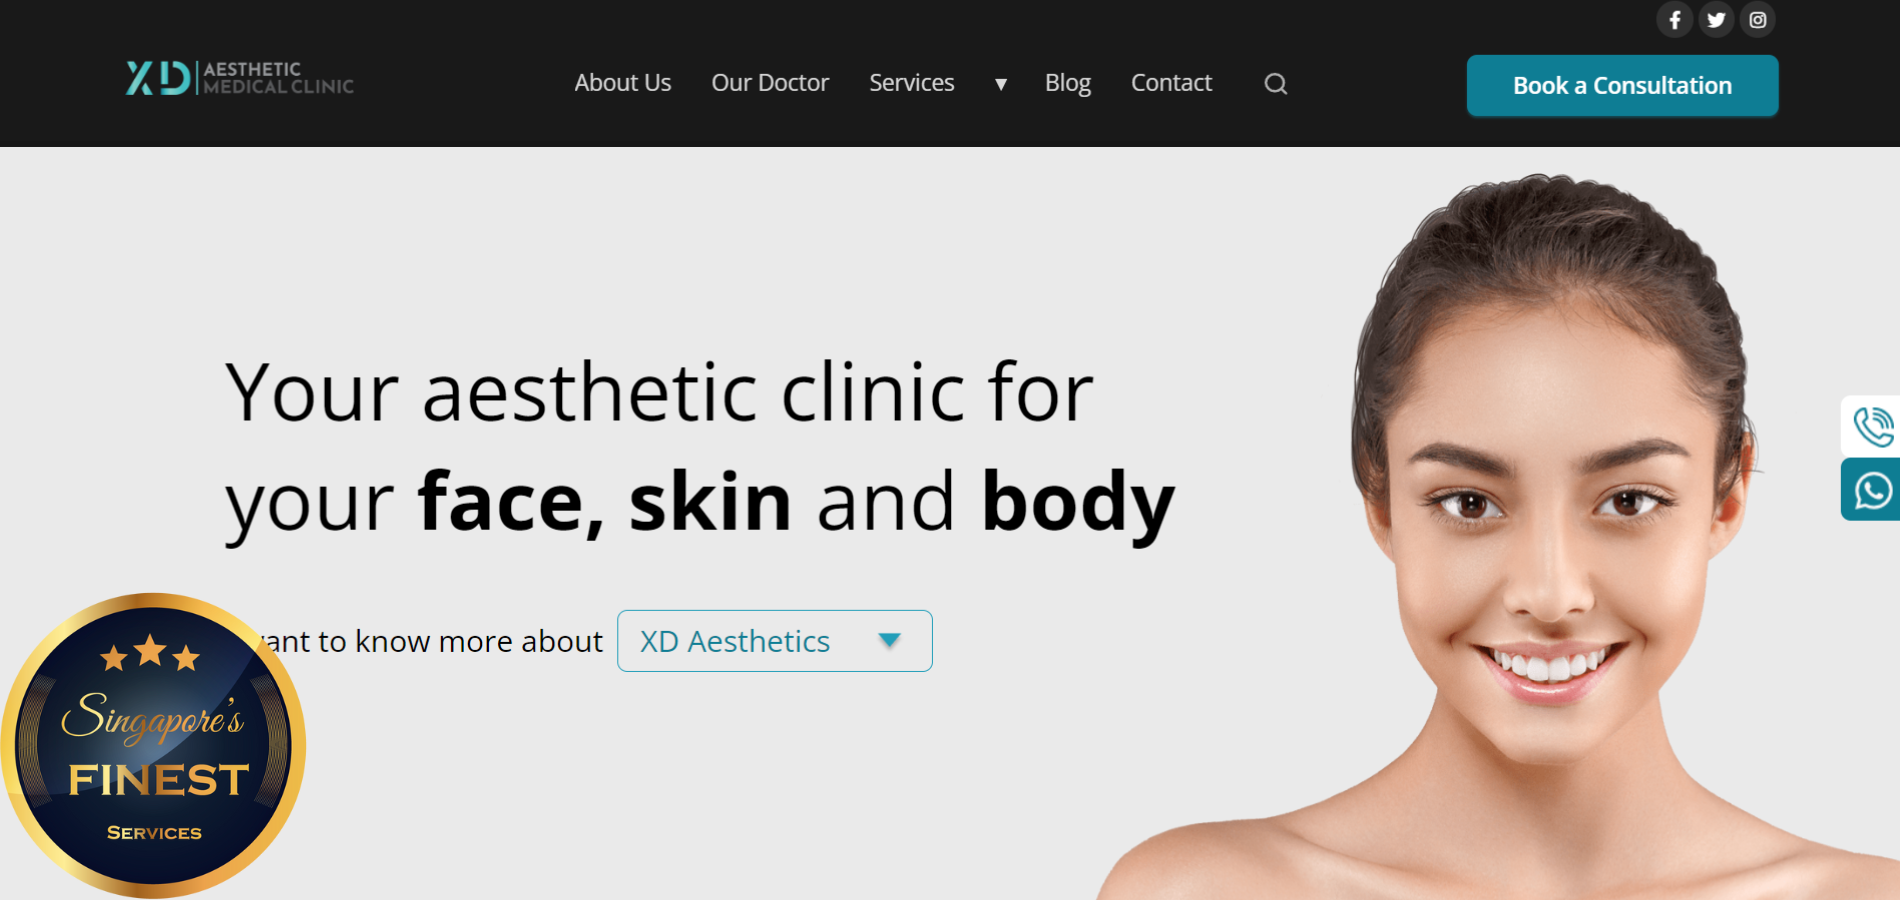 The Finest Clinics for Nose Fillers in Singapore